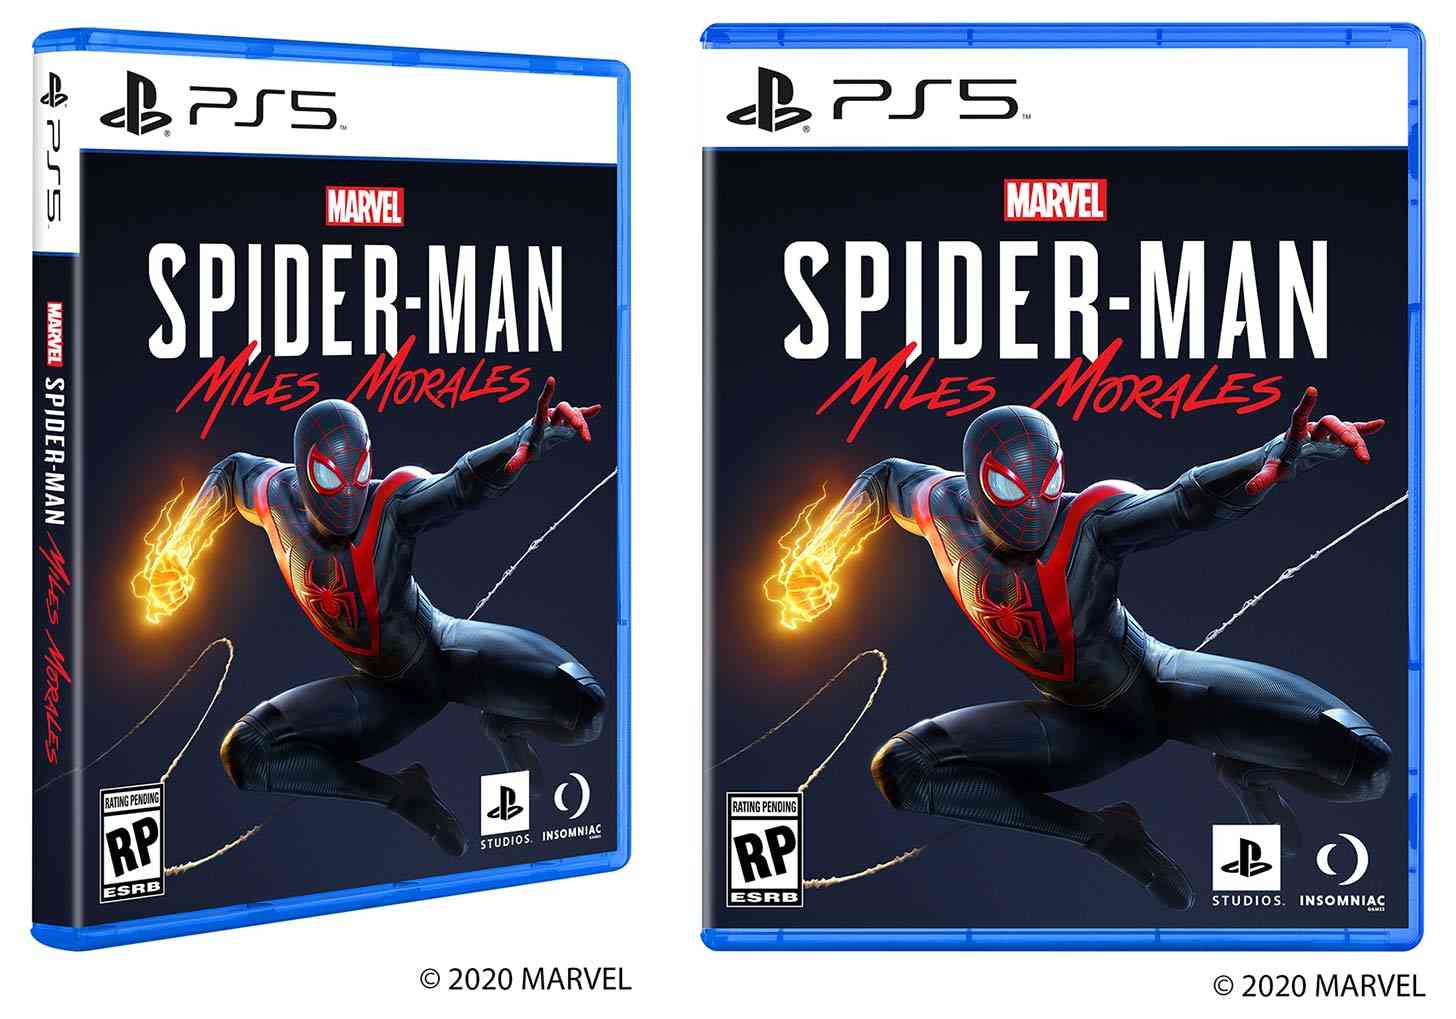 PS5 game box design official